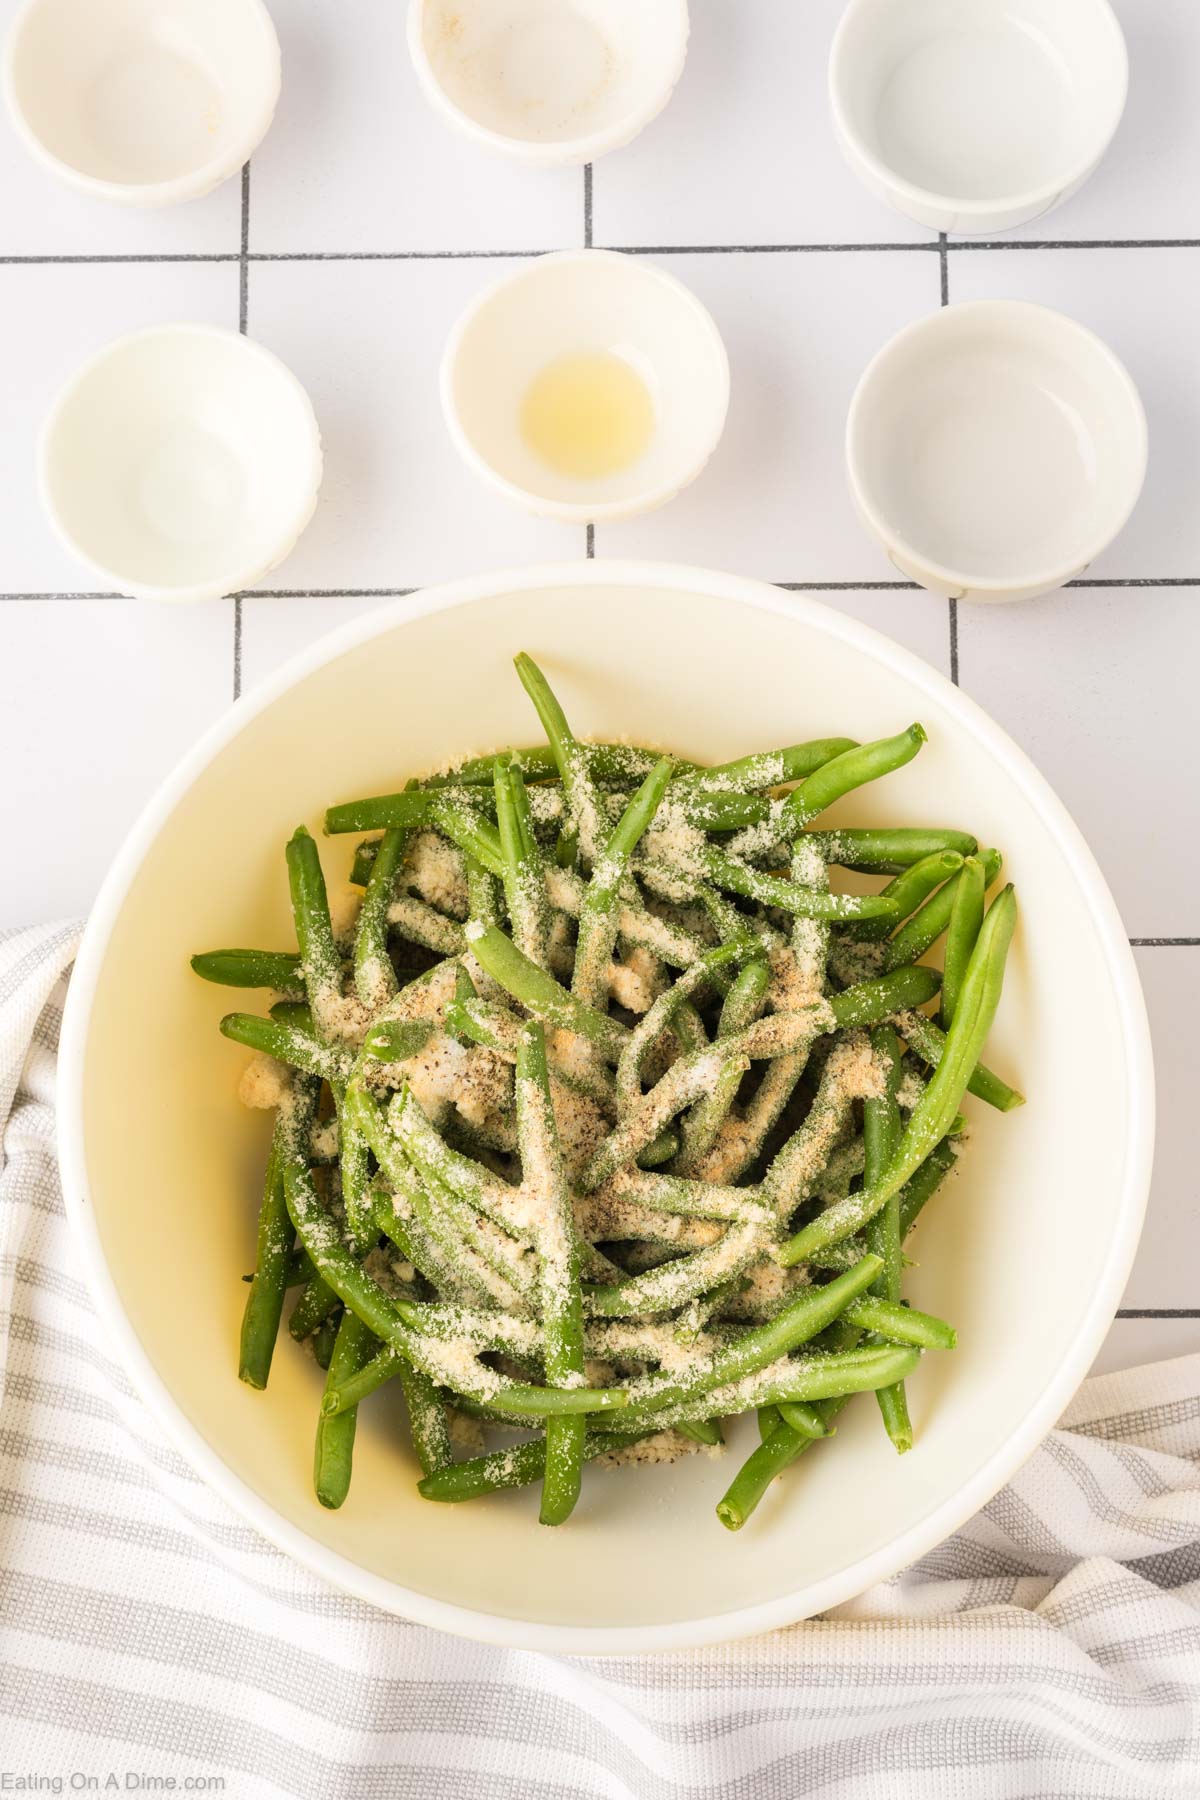 Placing the seasoning and oil on the green beans in a bowl